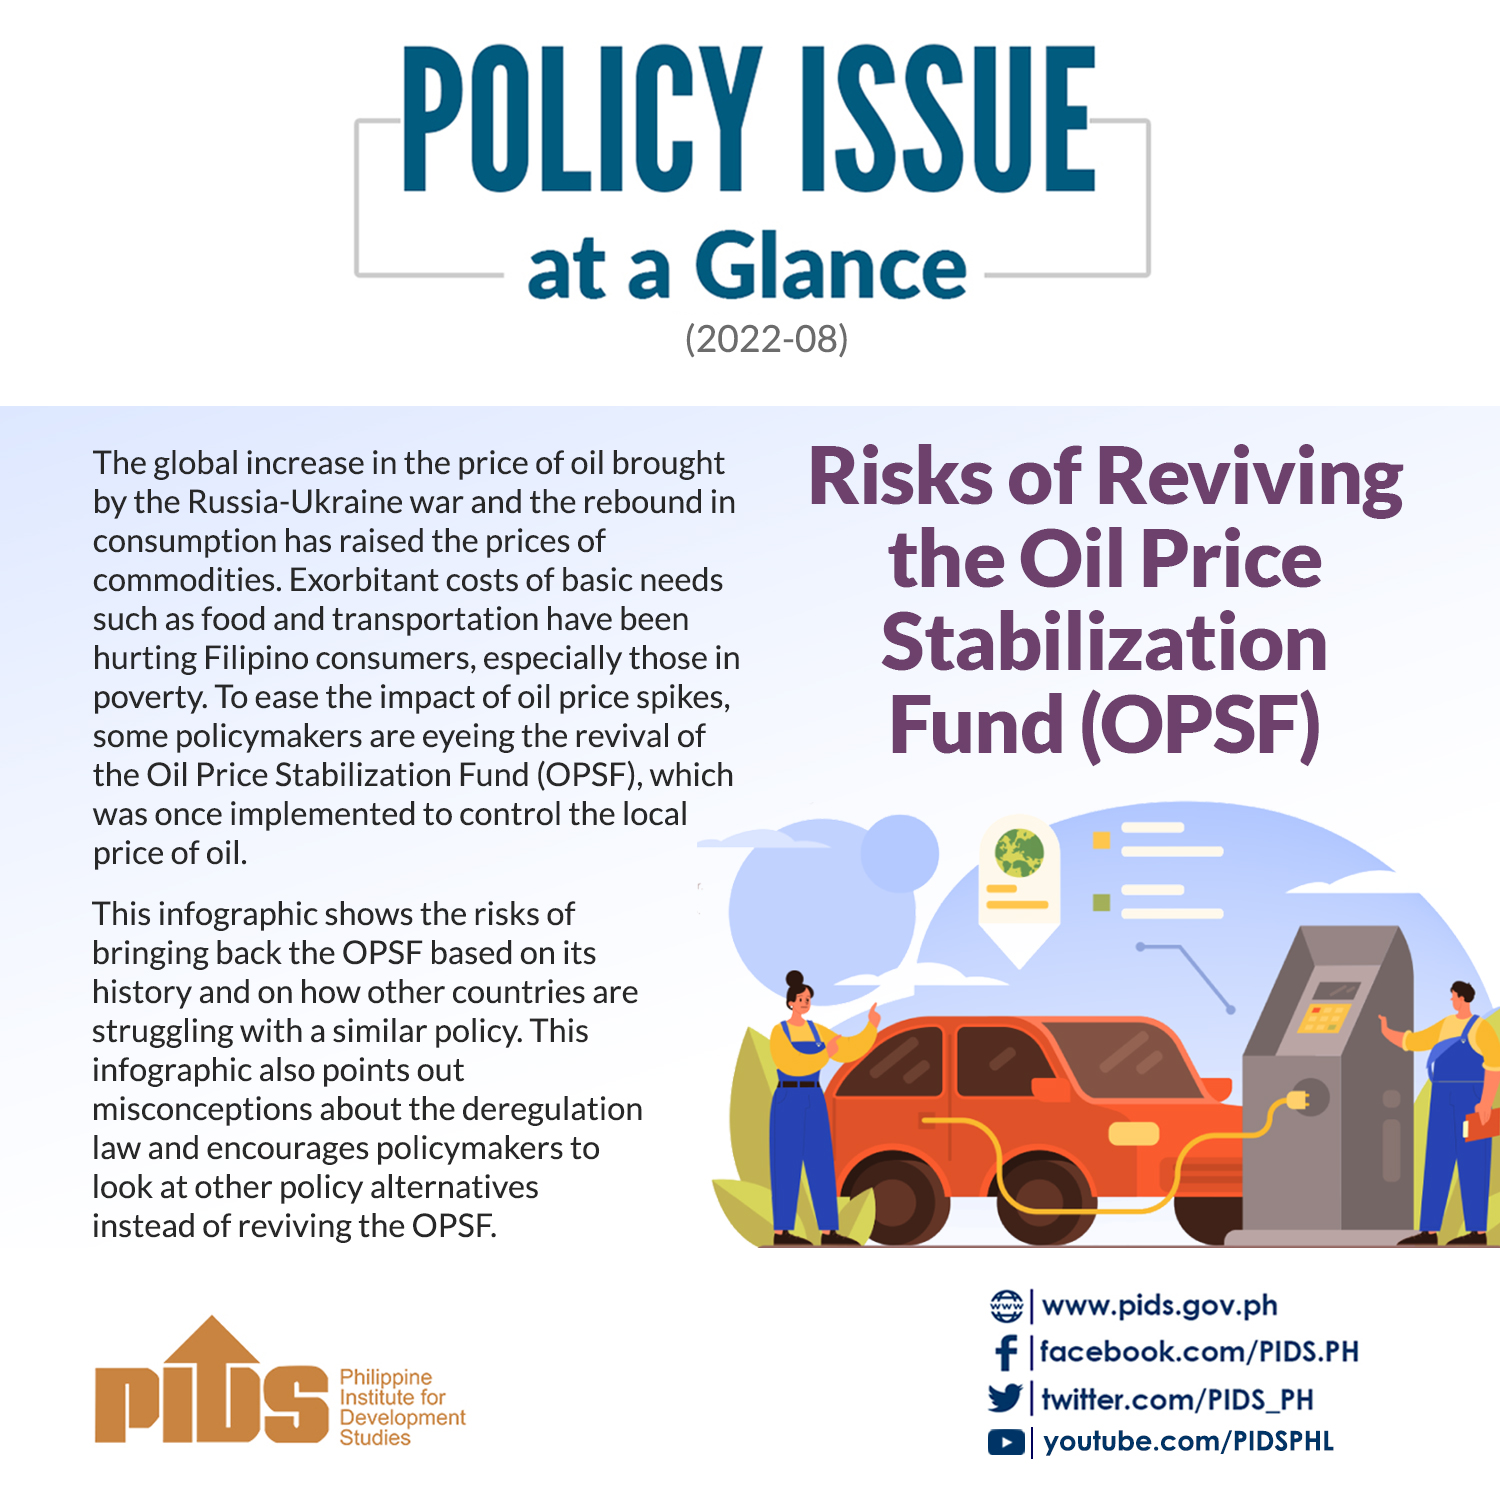 POLICY ISSUE AT A GLANCE: Risks of Reviving the Oil Price Stabilization Fund (OPSF)-PIAAG 2022-08 01.jpg